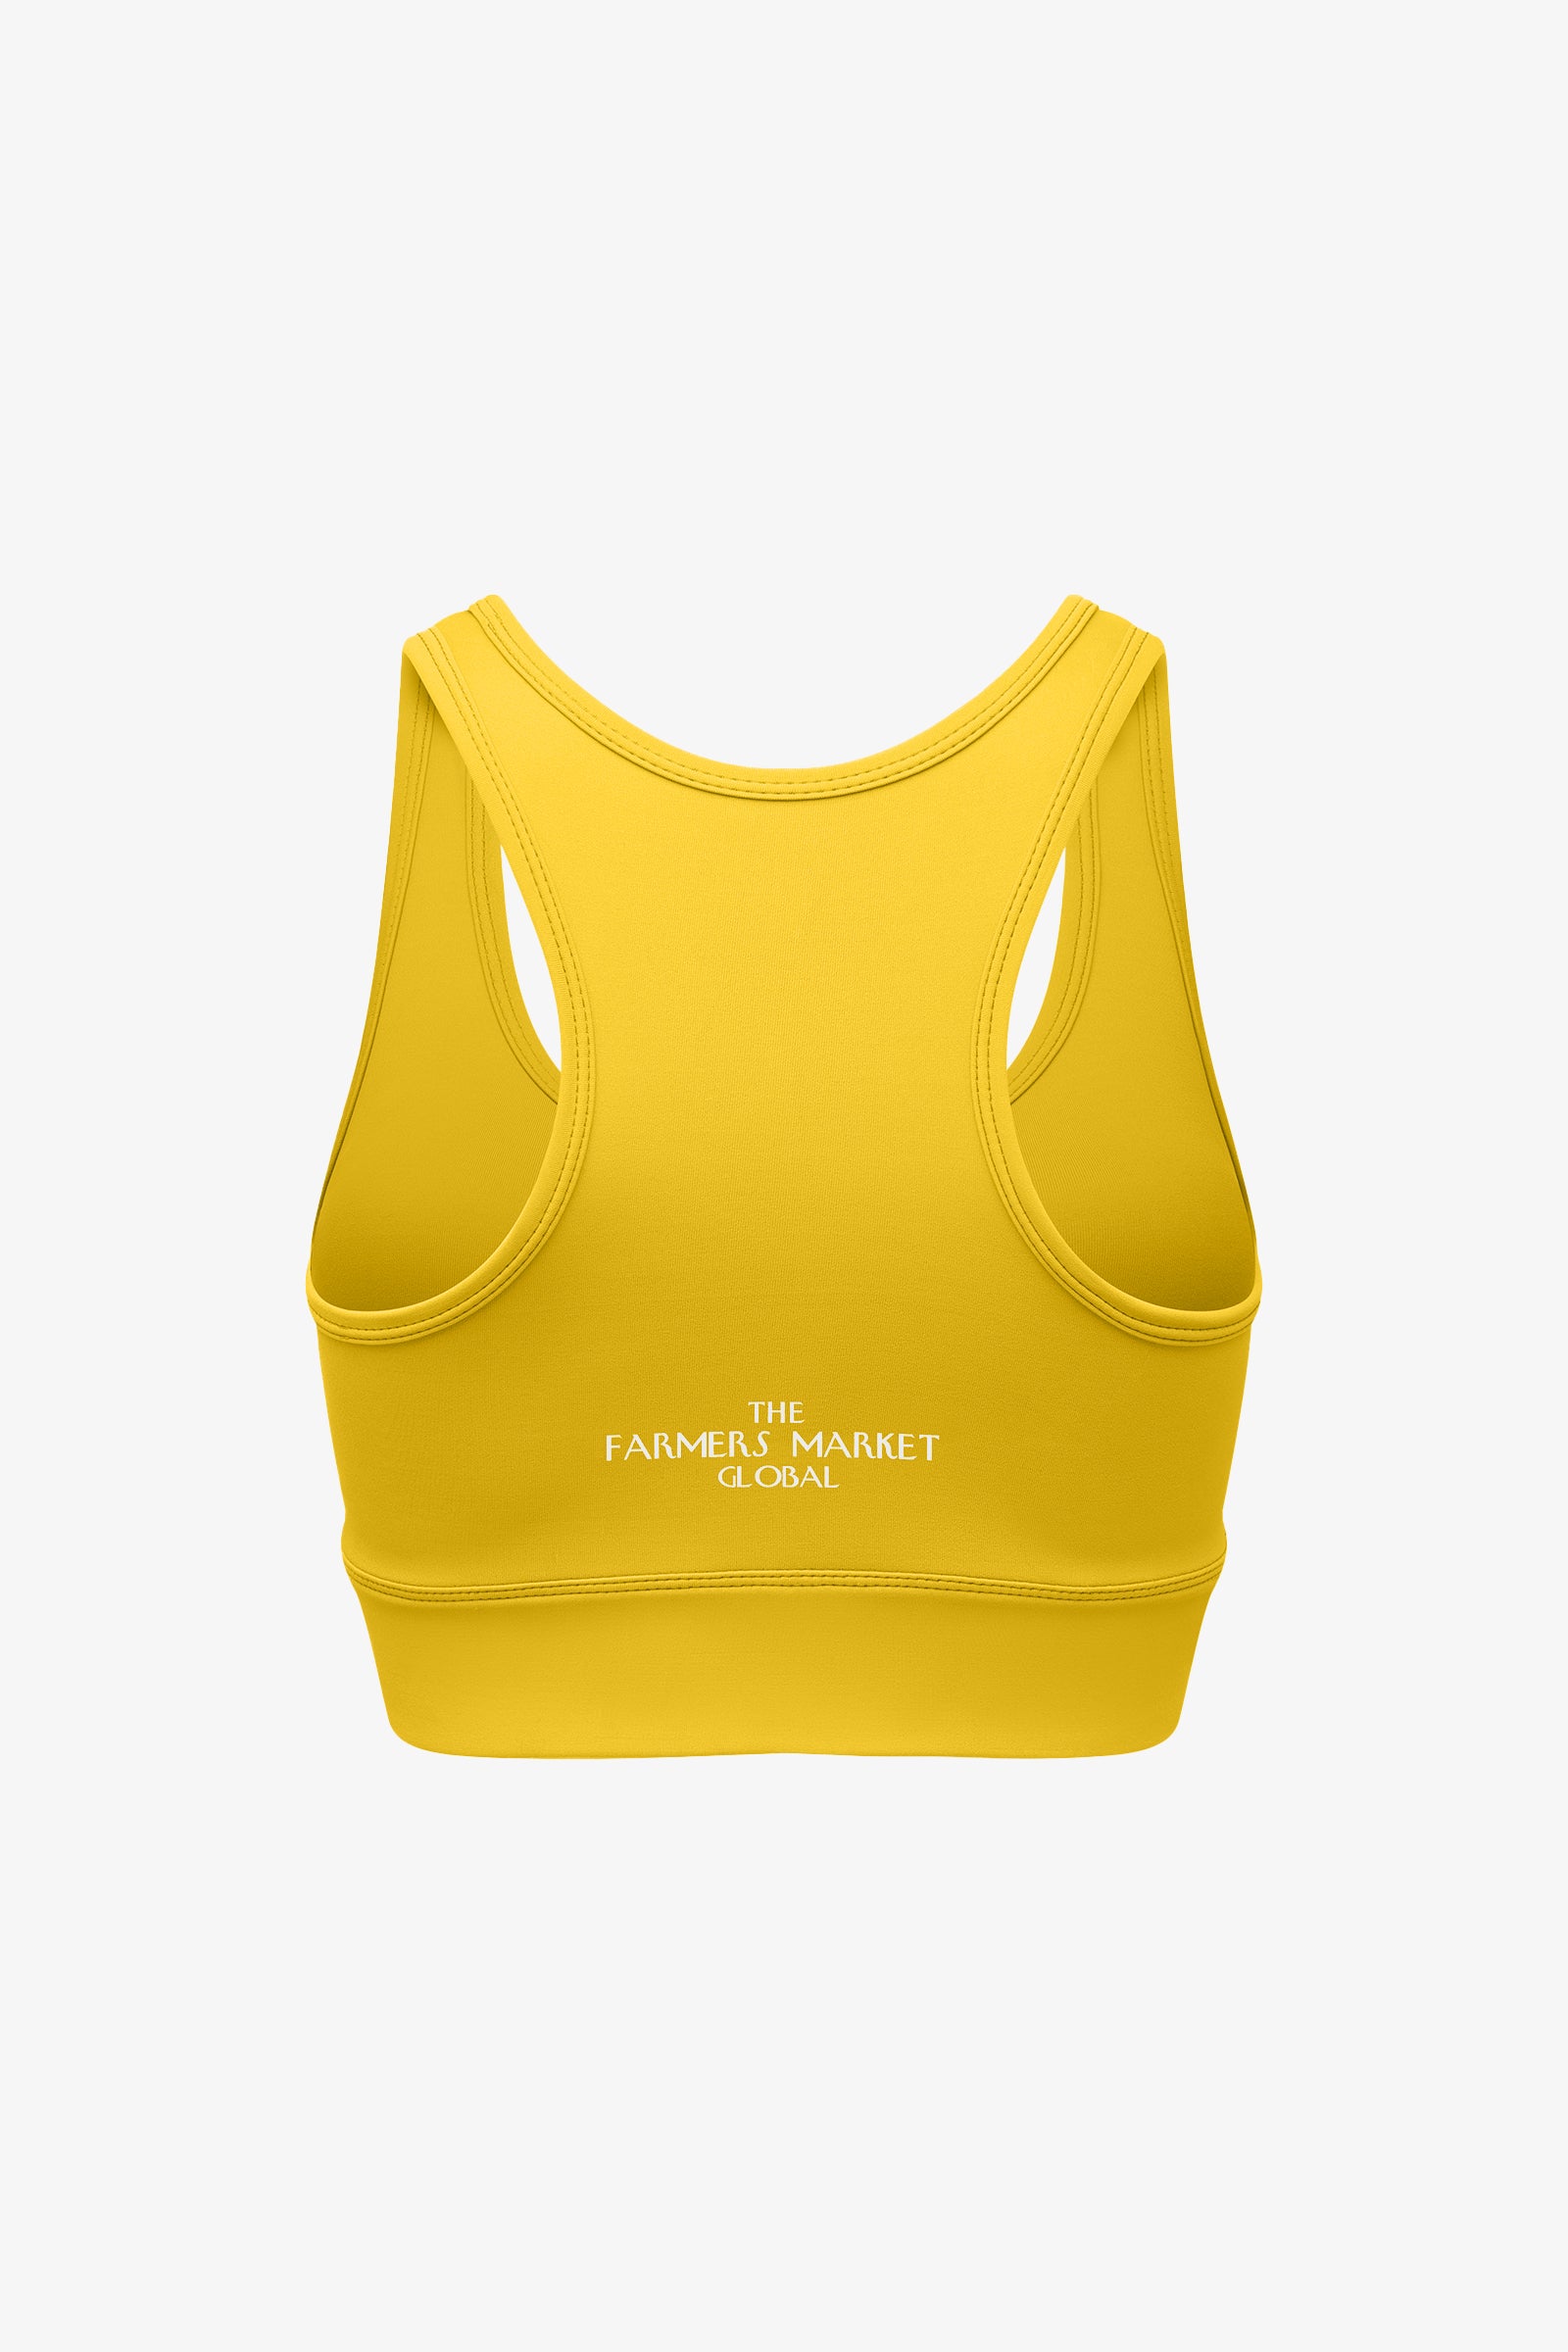 Buy XAFITI High-Strength Gather And Shape Sports Bra in yellow 2024 Online